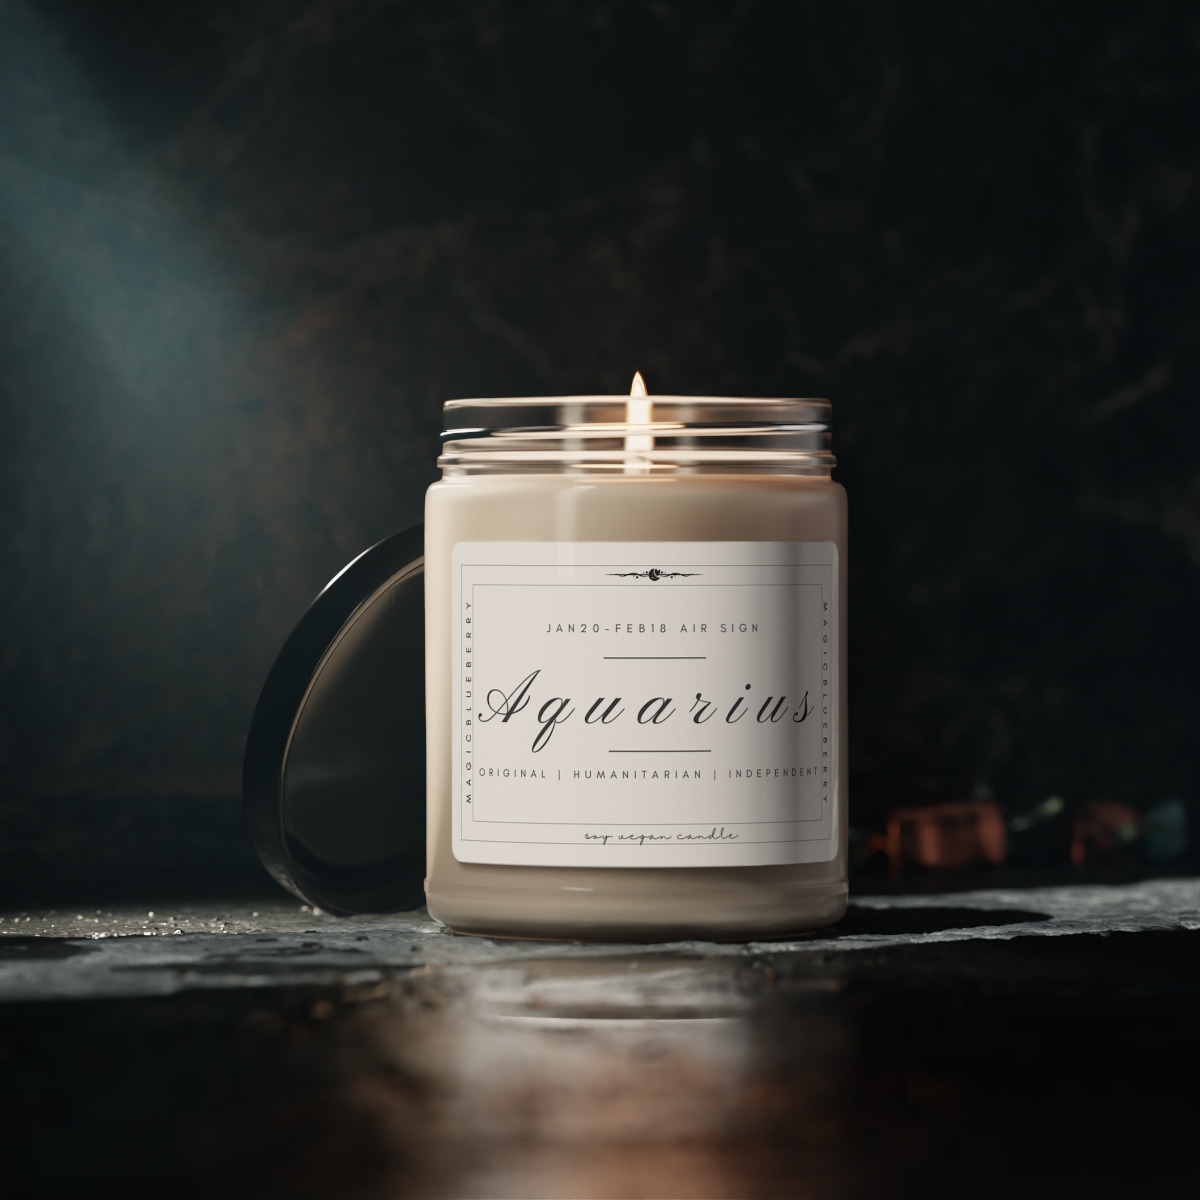 Aquarius - Scented Vegan Soy Wax Candle Clear Jar Candle, Spell Candle, Sassy Candle Vegan Candle Cotton Wick Candle Home Deco product thumbnail image